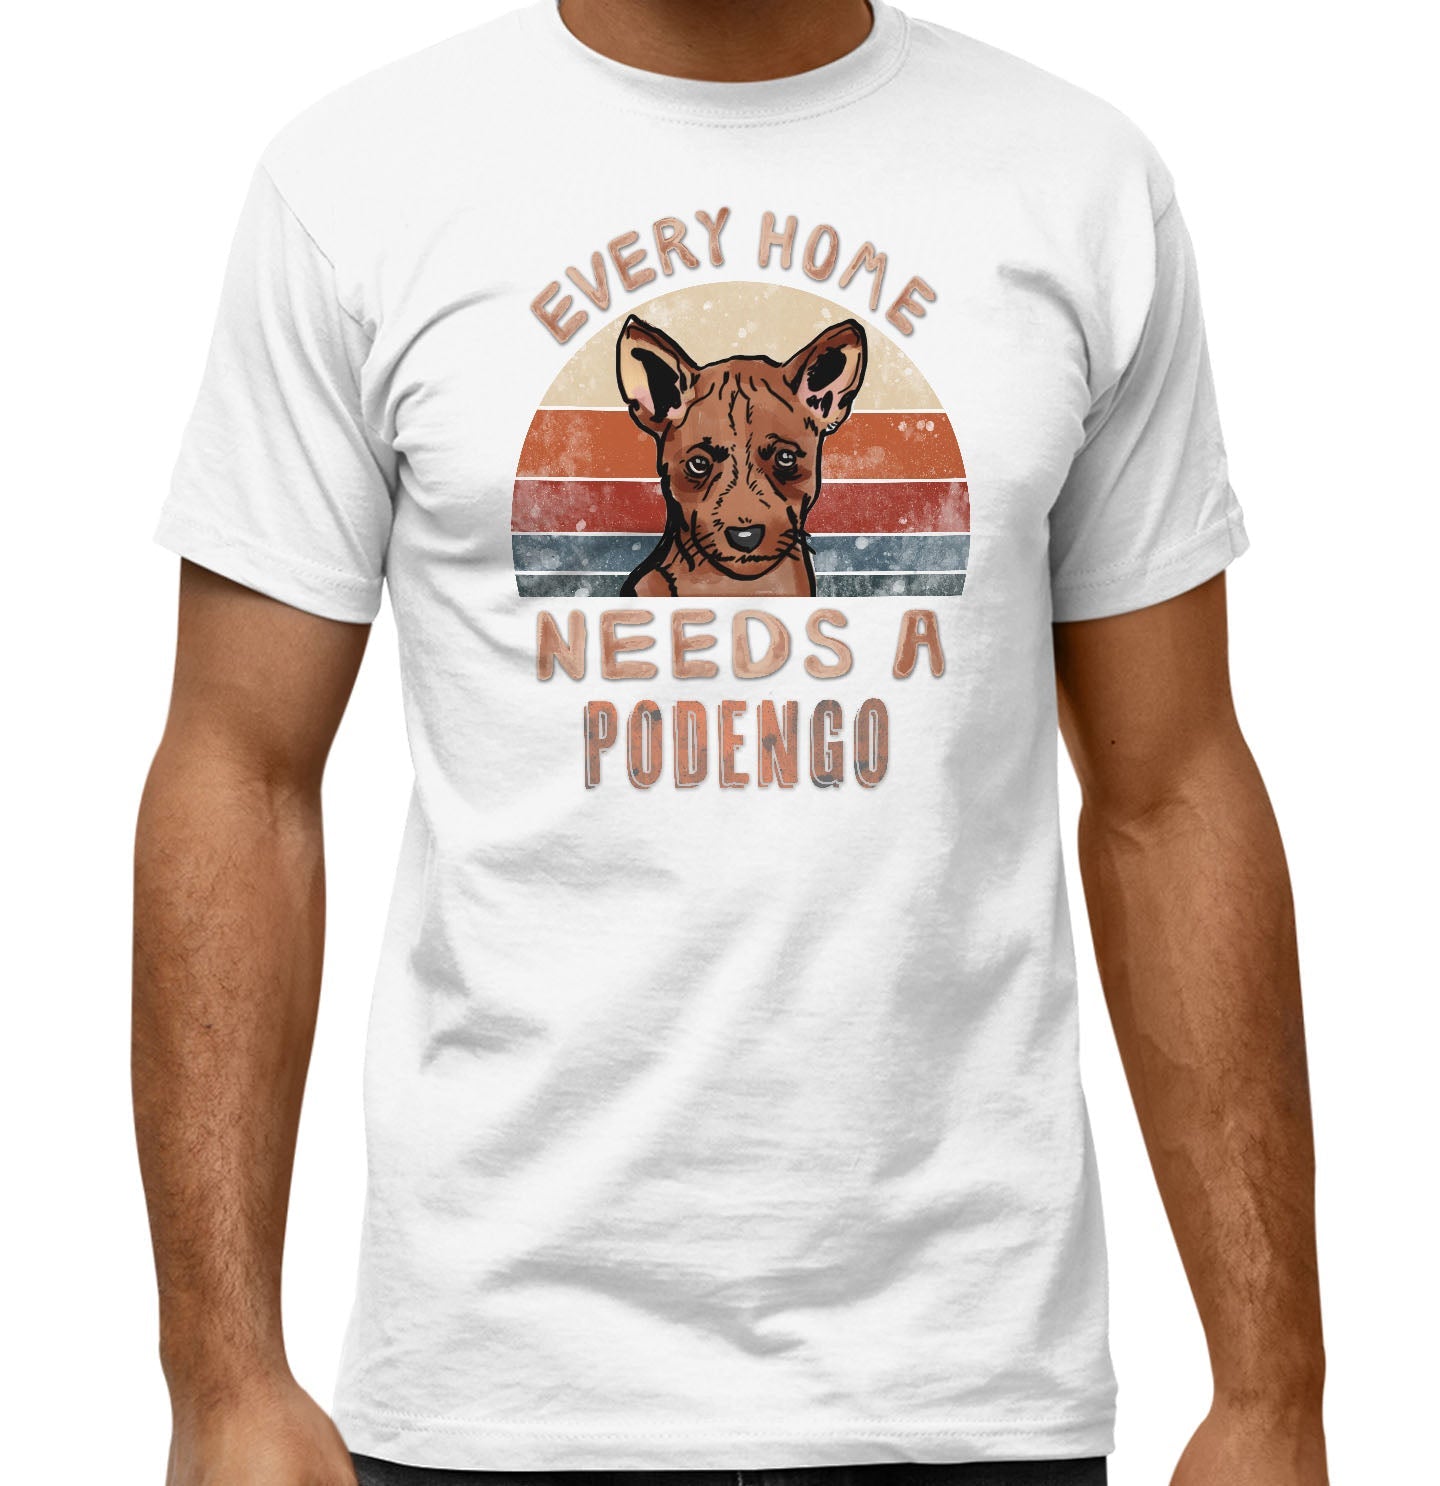 Every Home Needs a Portuguese Podengo - Adult Unisex T-Shirt